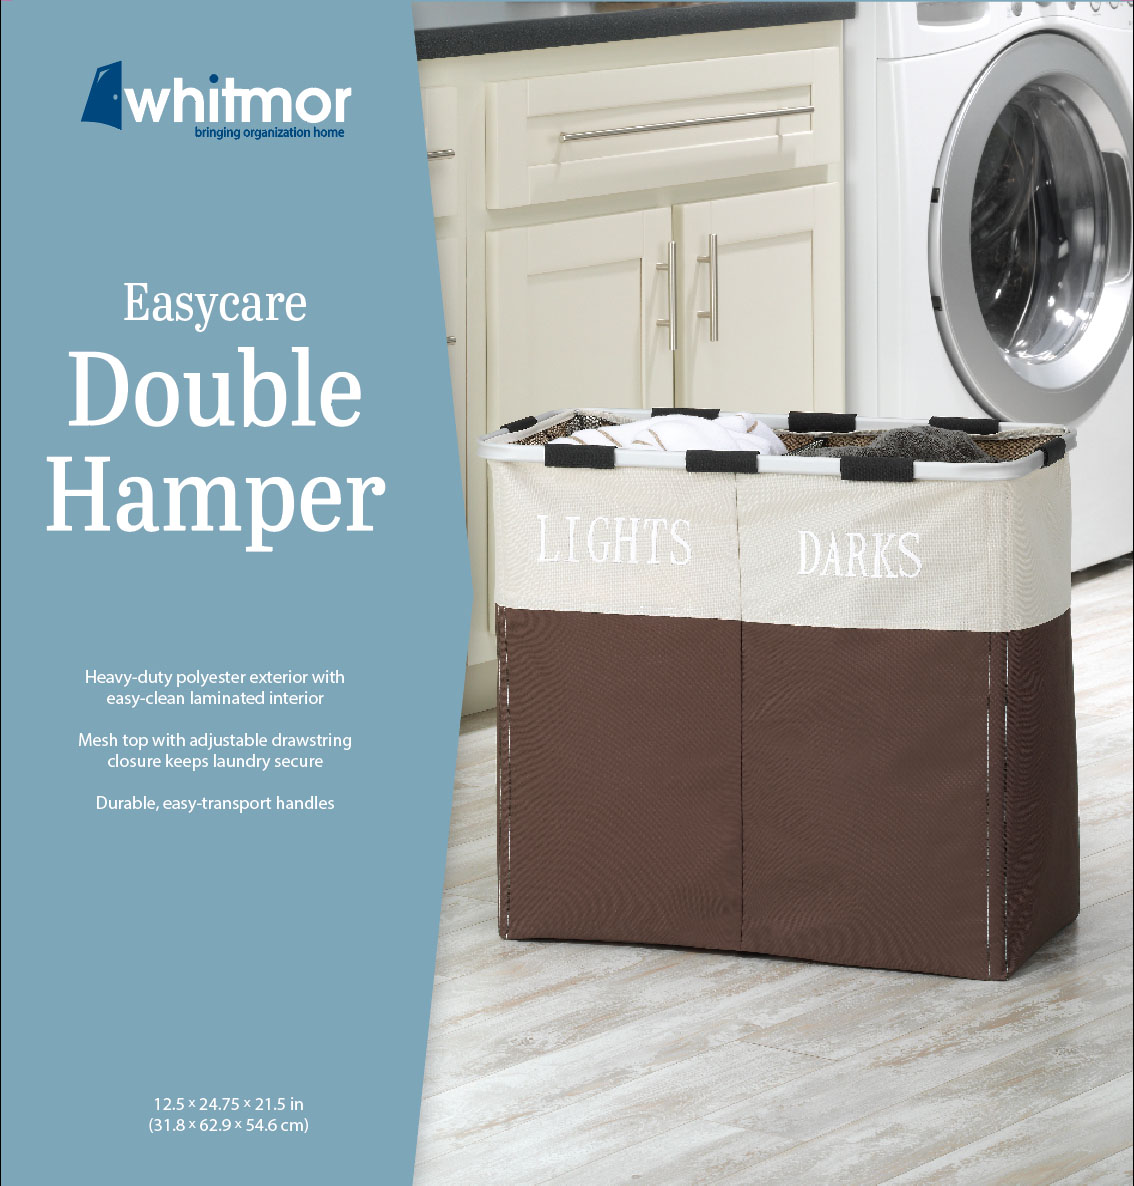 Whitmor Easycare Polyester Double Laundry Hamper - Lights and Darks Separator - Java - For Adult Use - image 5 of 7